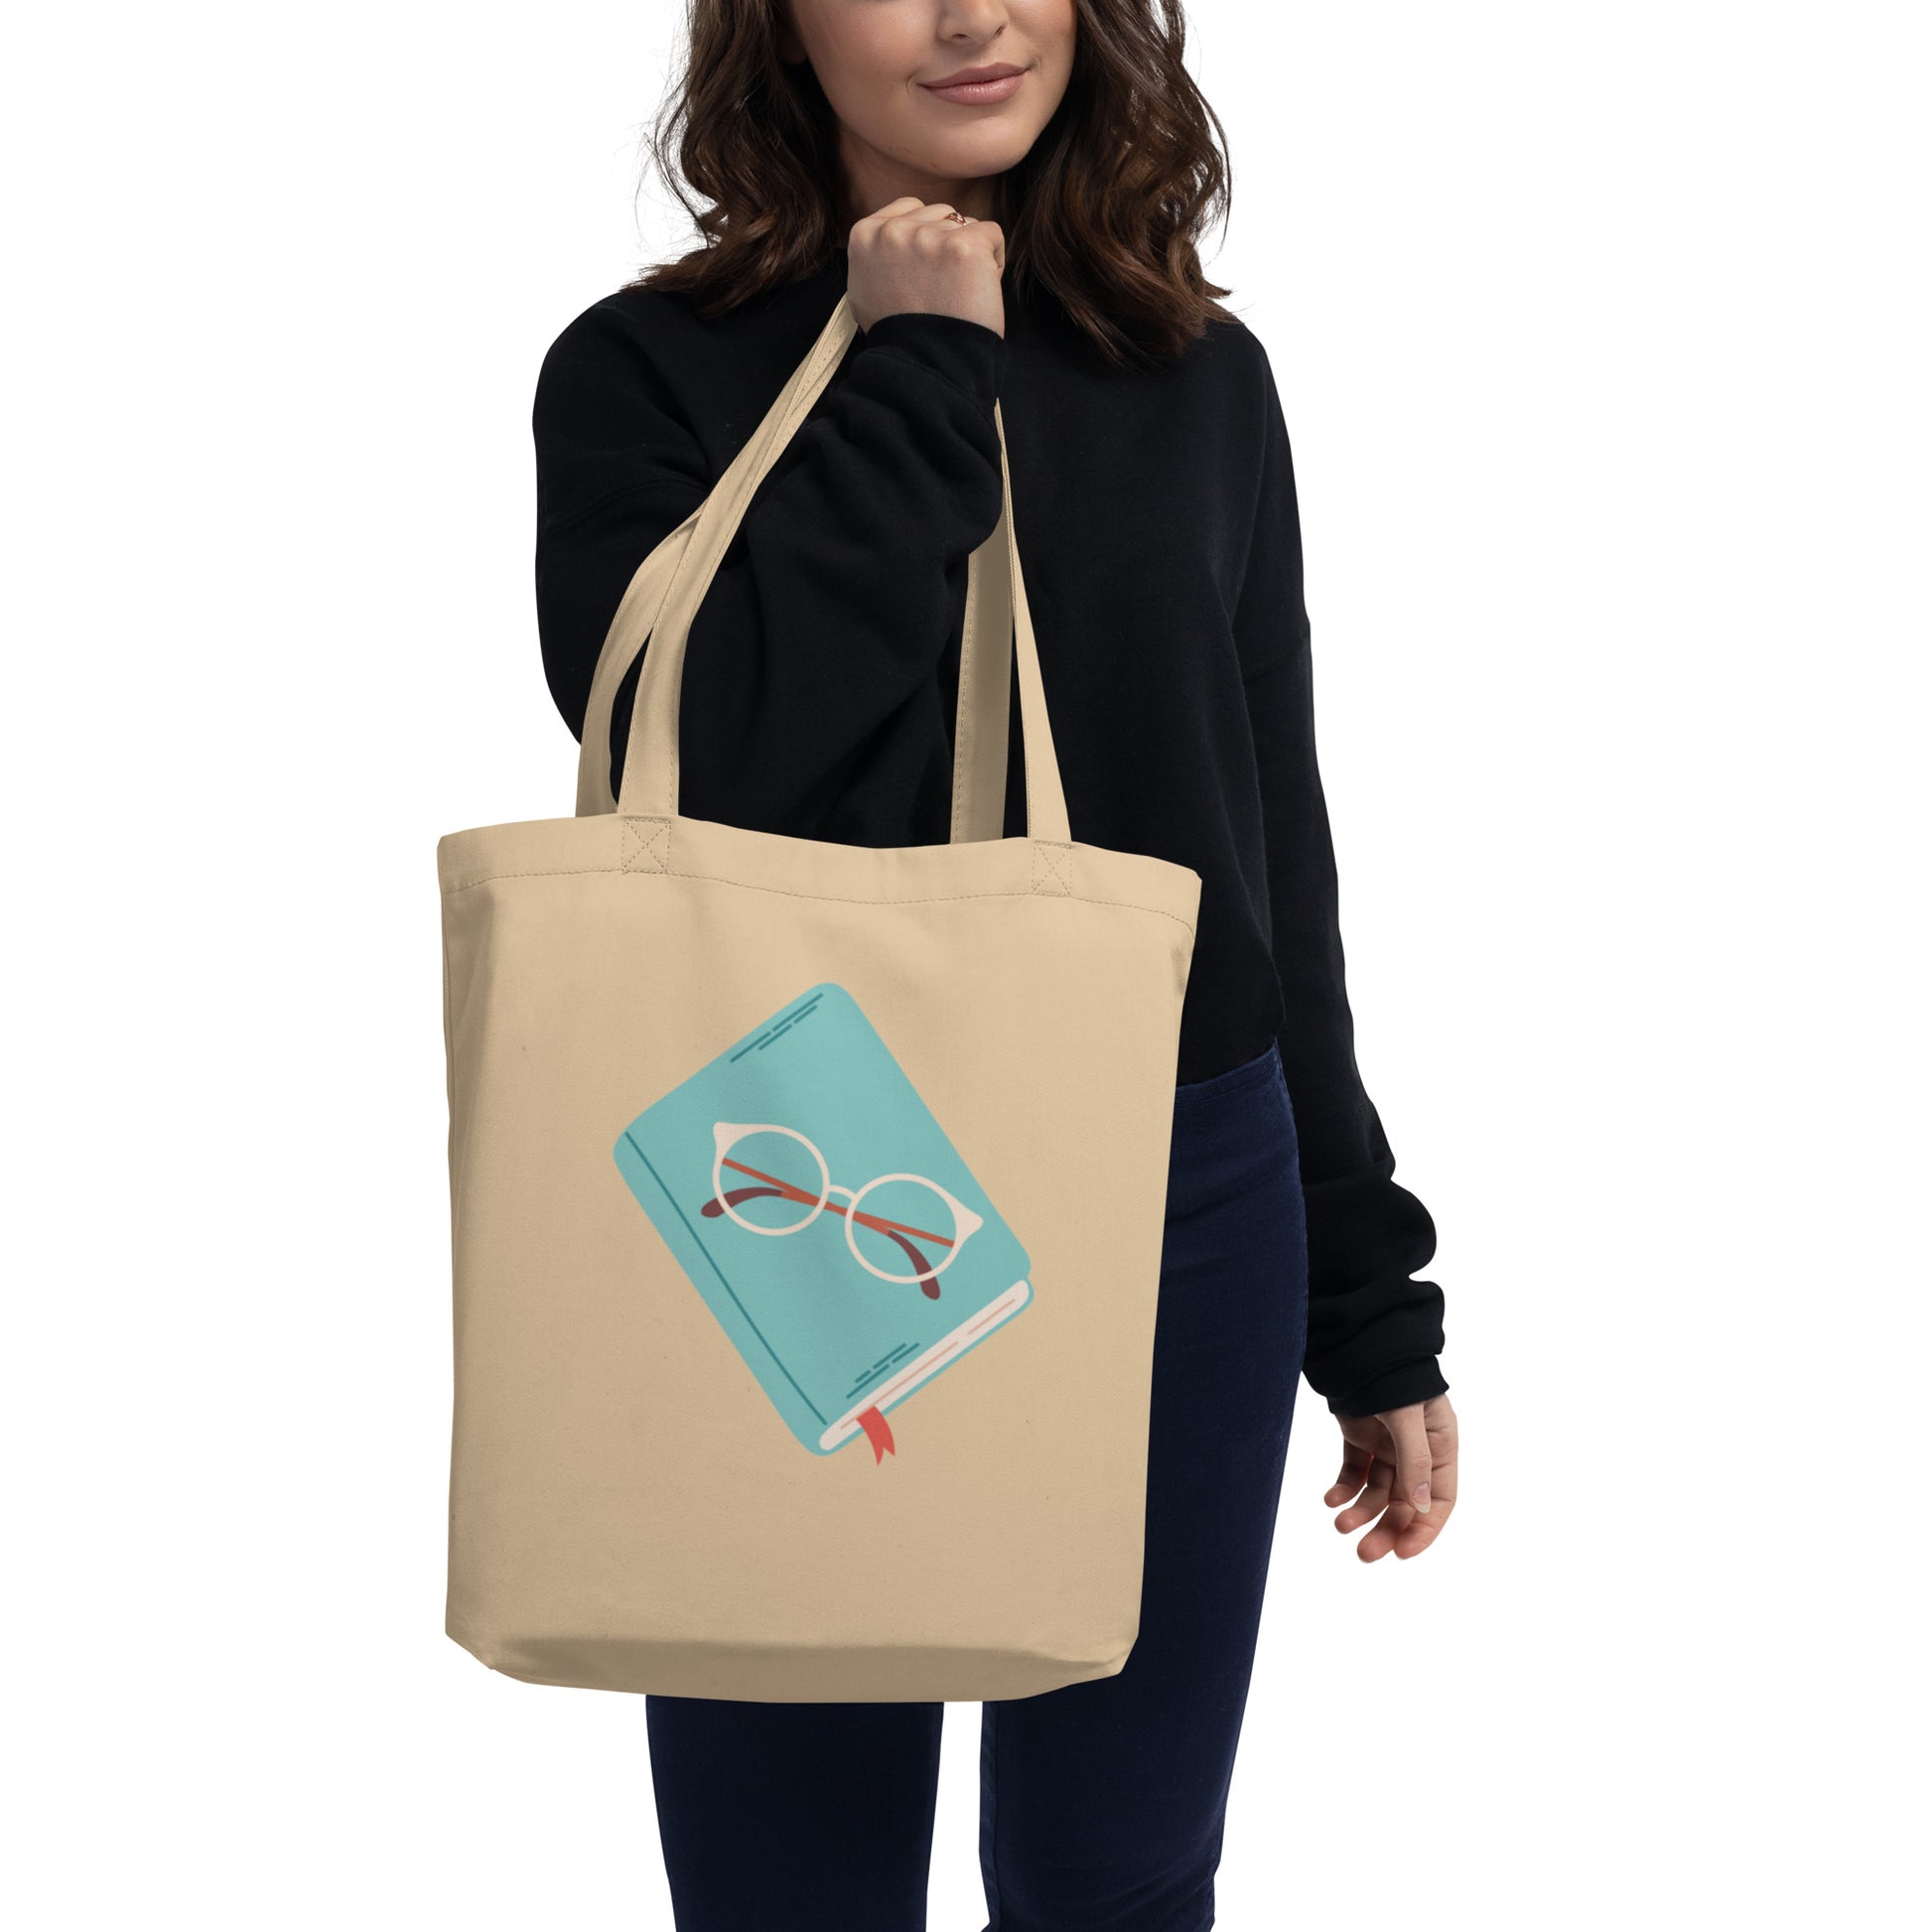 Woman hold tan canvas cotton tote bag with a cute illustration of a teal book with glasses on top